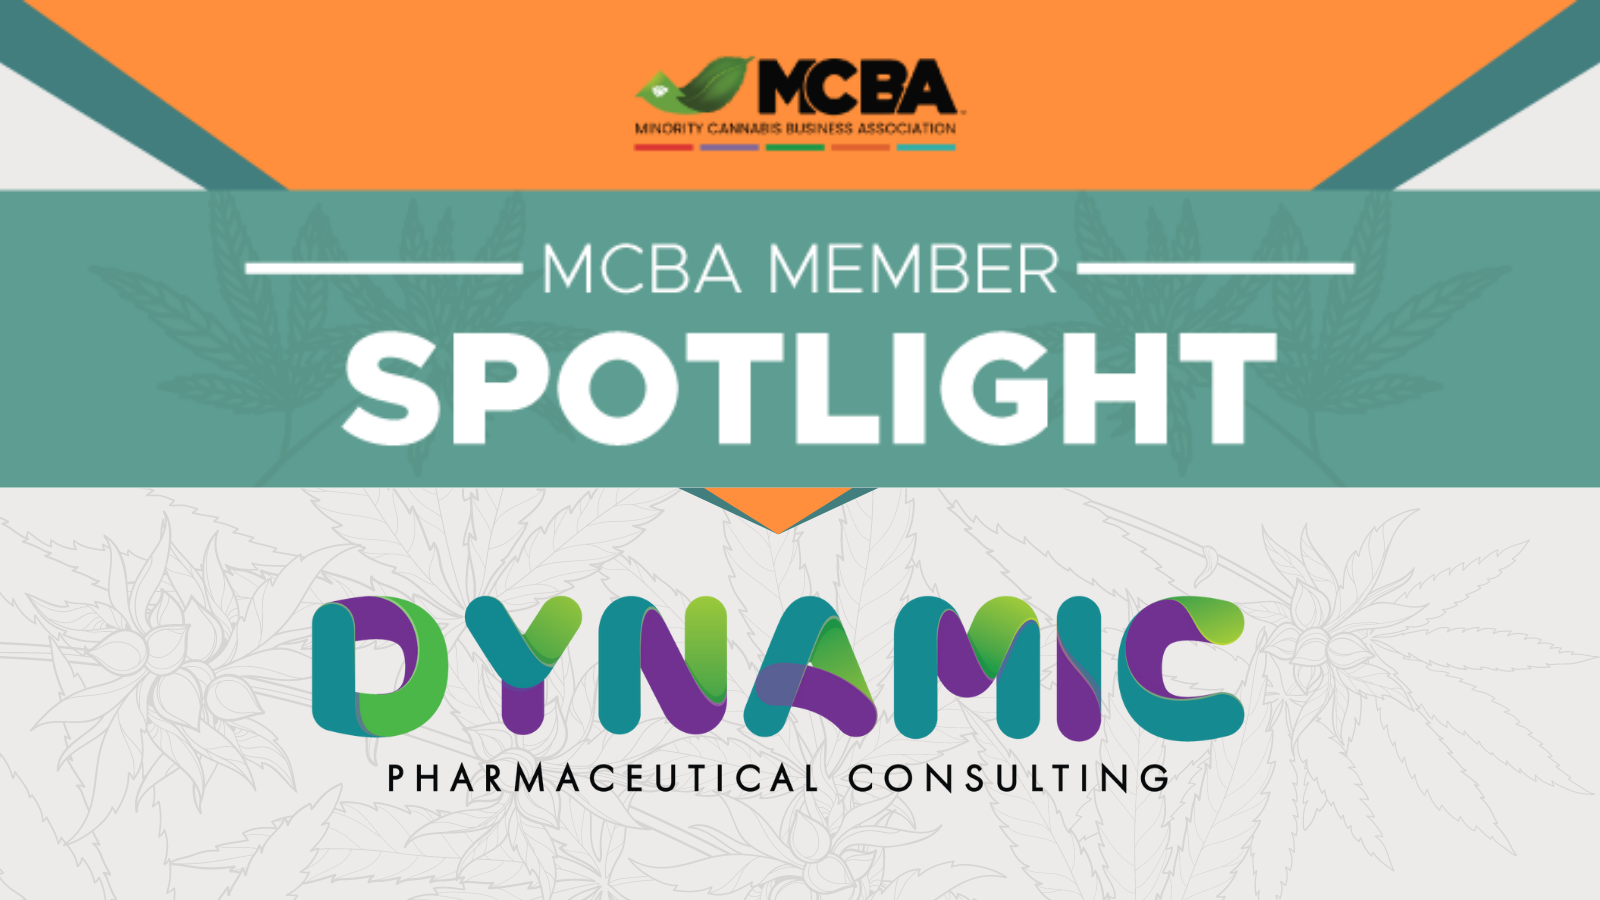 Featured image for “Member Spotlight: Dynamic Pharmaceutical Consulting”